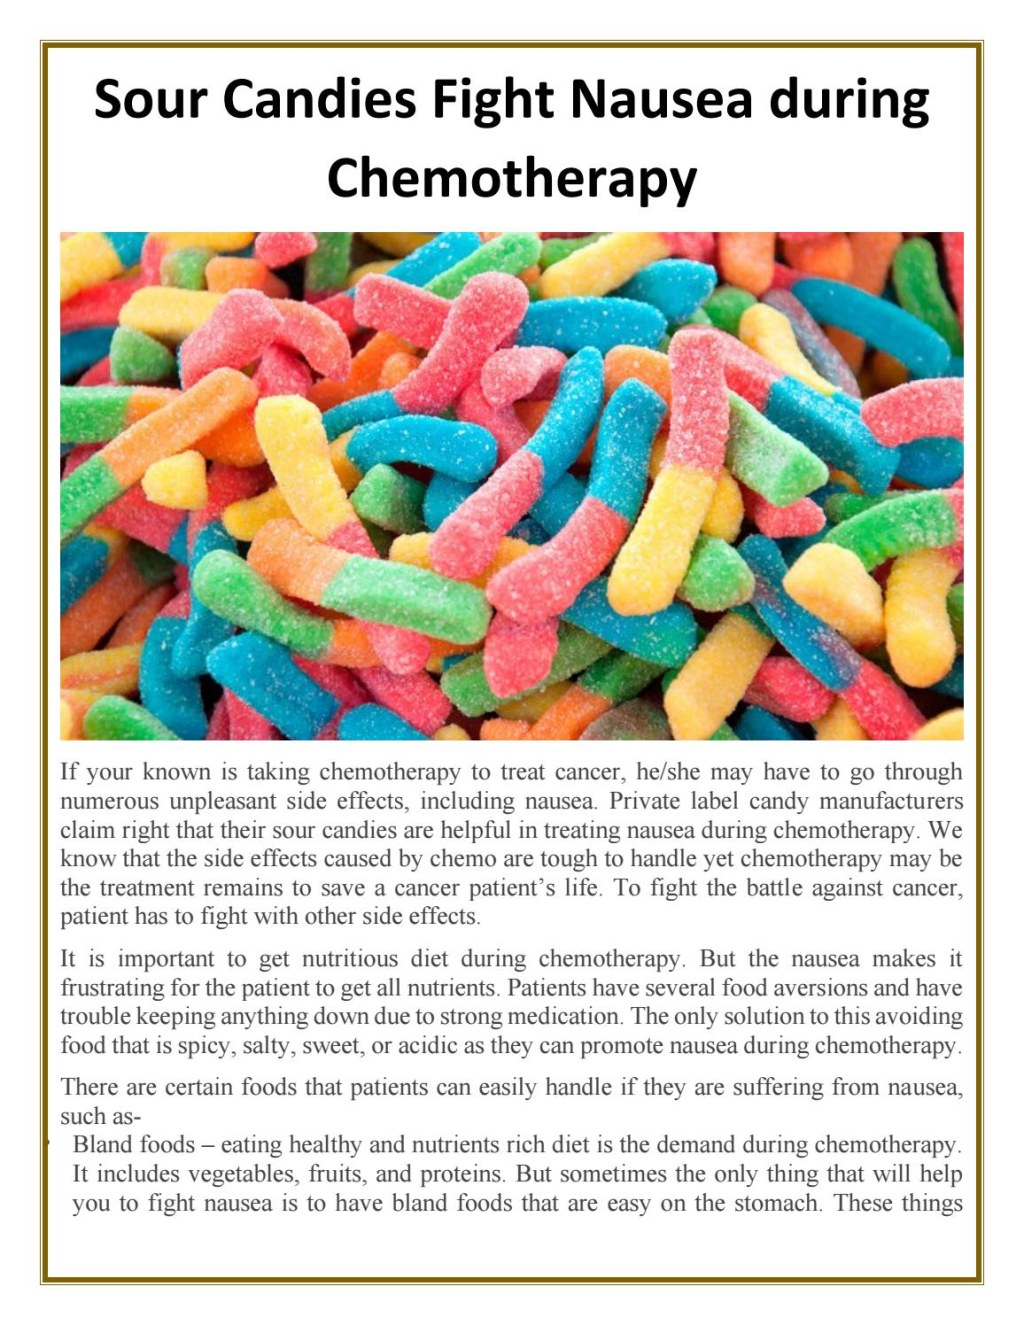 Picture of: Sour candies fight nausea during chemotherapy by Swan’ Sweets – Issuu